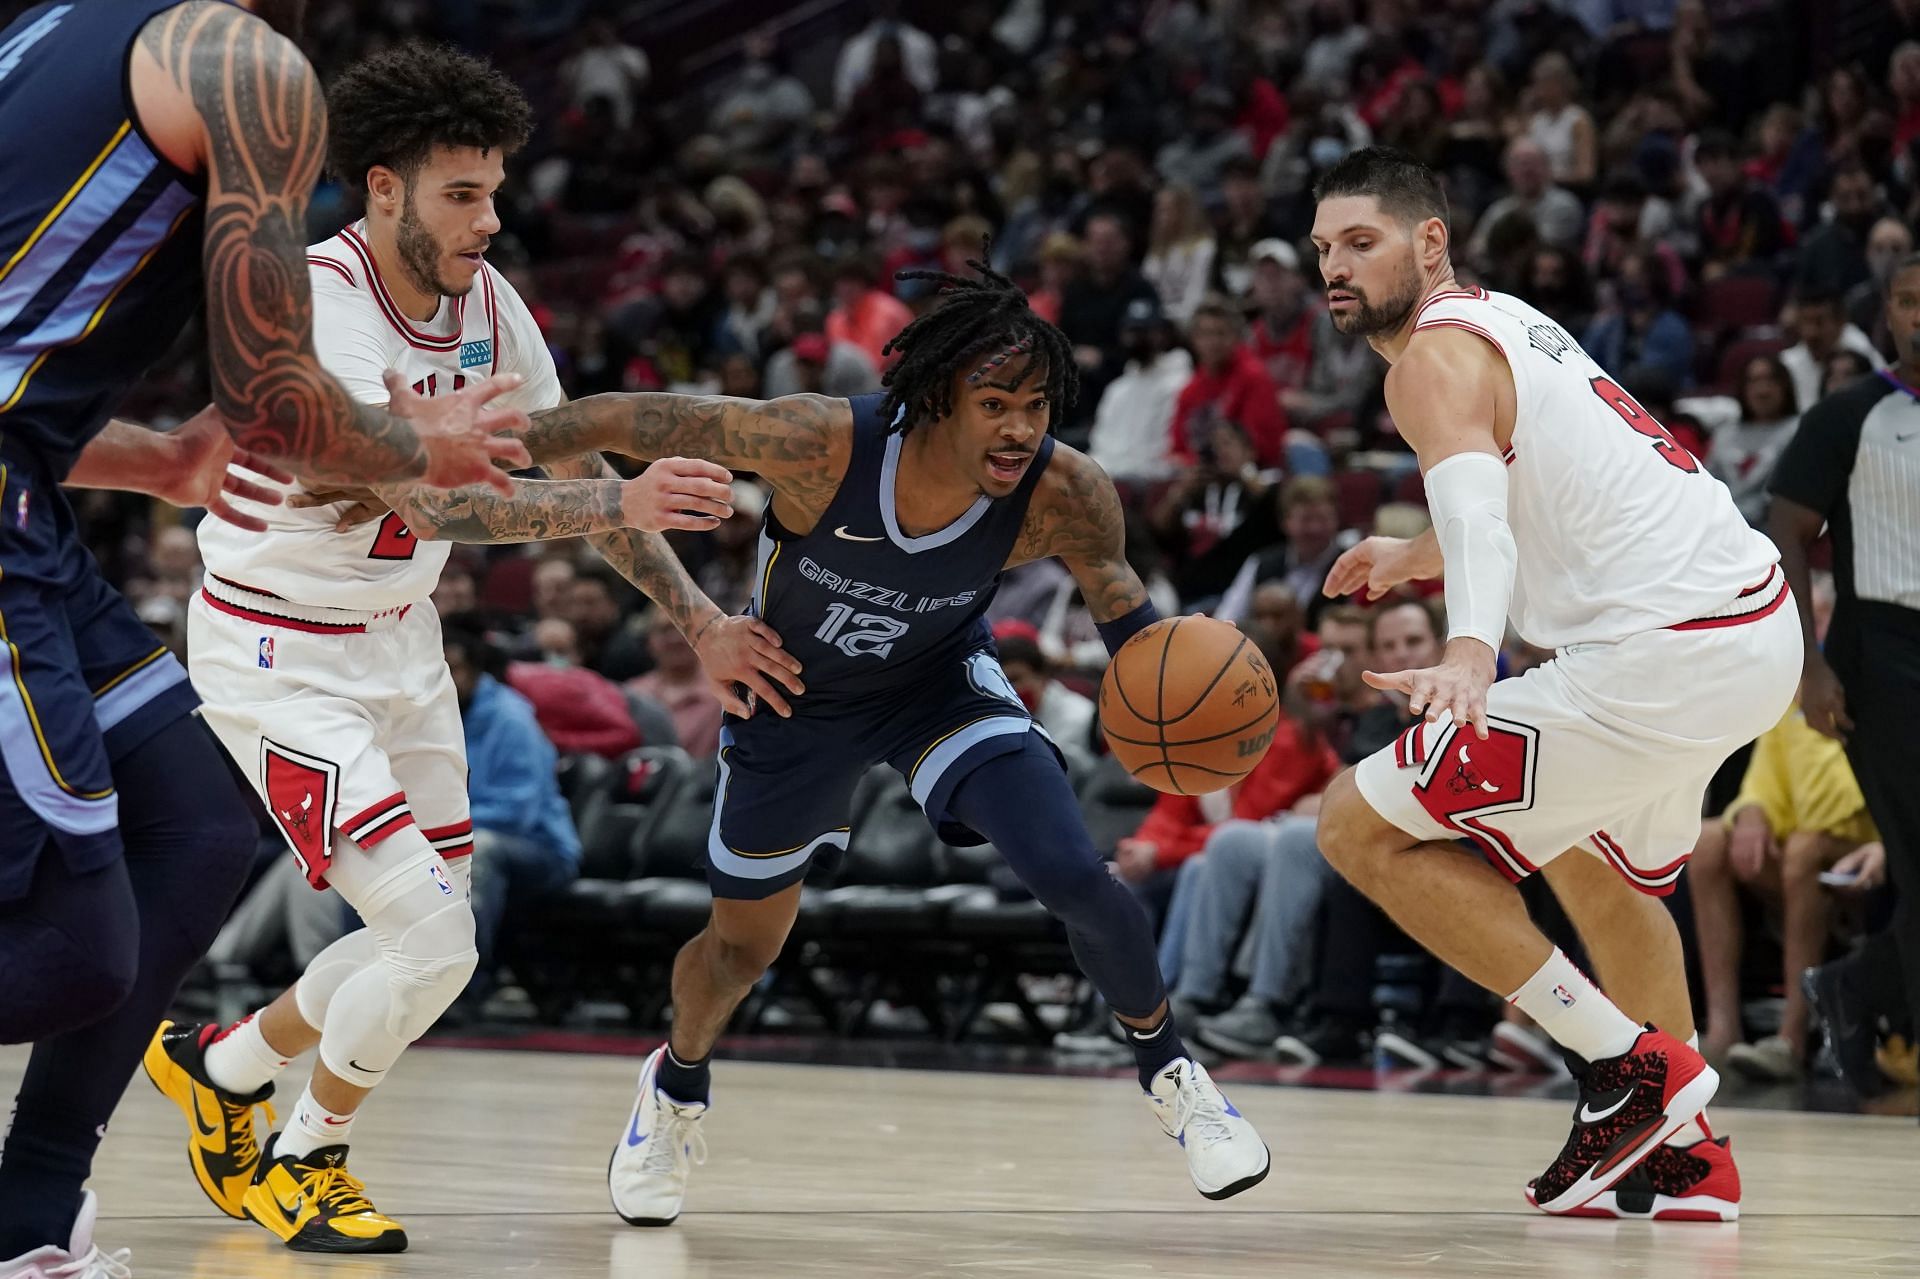 Ja Morant #12 of the Memphis Grizzlies dribbles the ball past Lonzo Ball #2 and Nikola Vucevic #9 of the Chicago Bulls in the second half during a preseason game at United Center on October 15, 2021 in Chicago, Illinois.